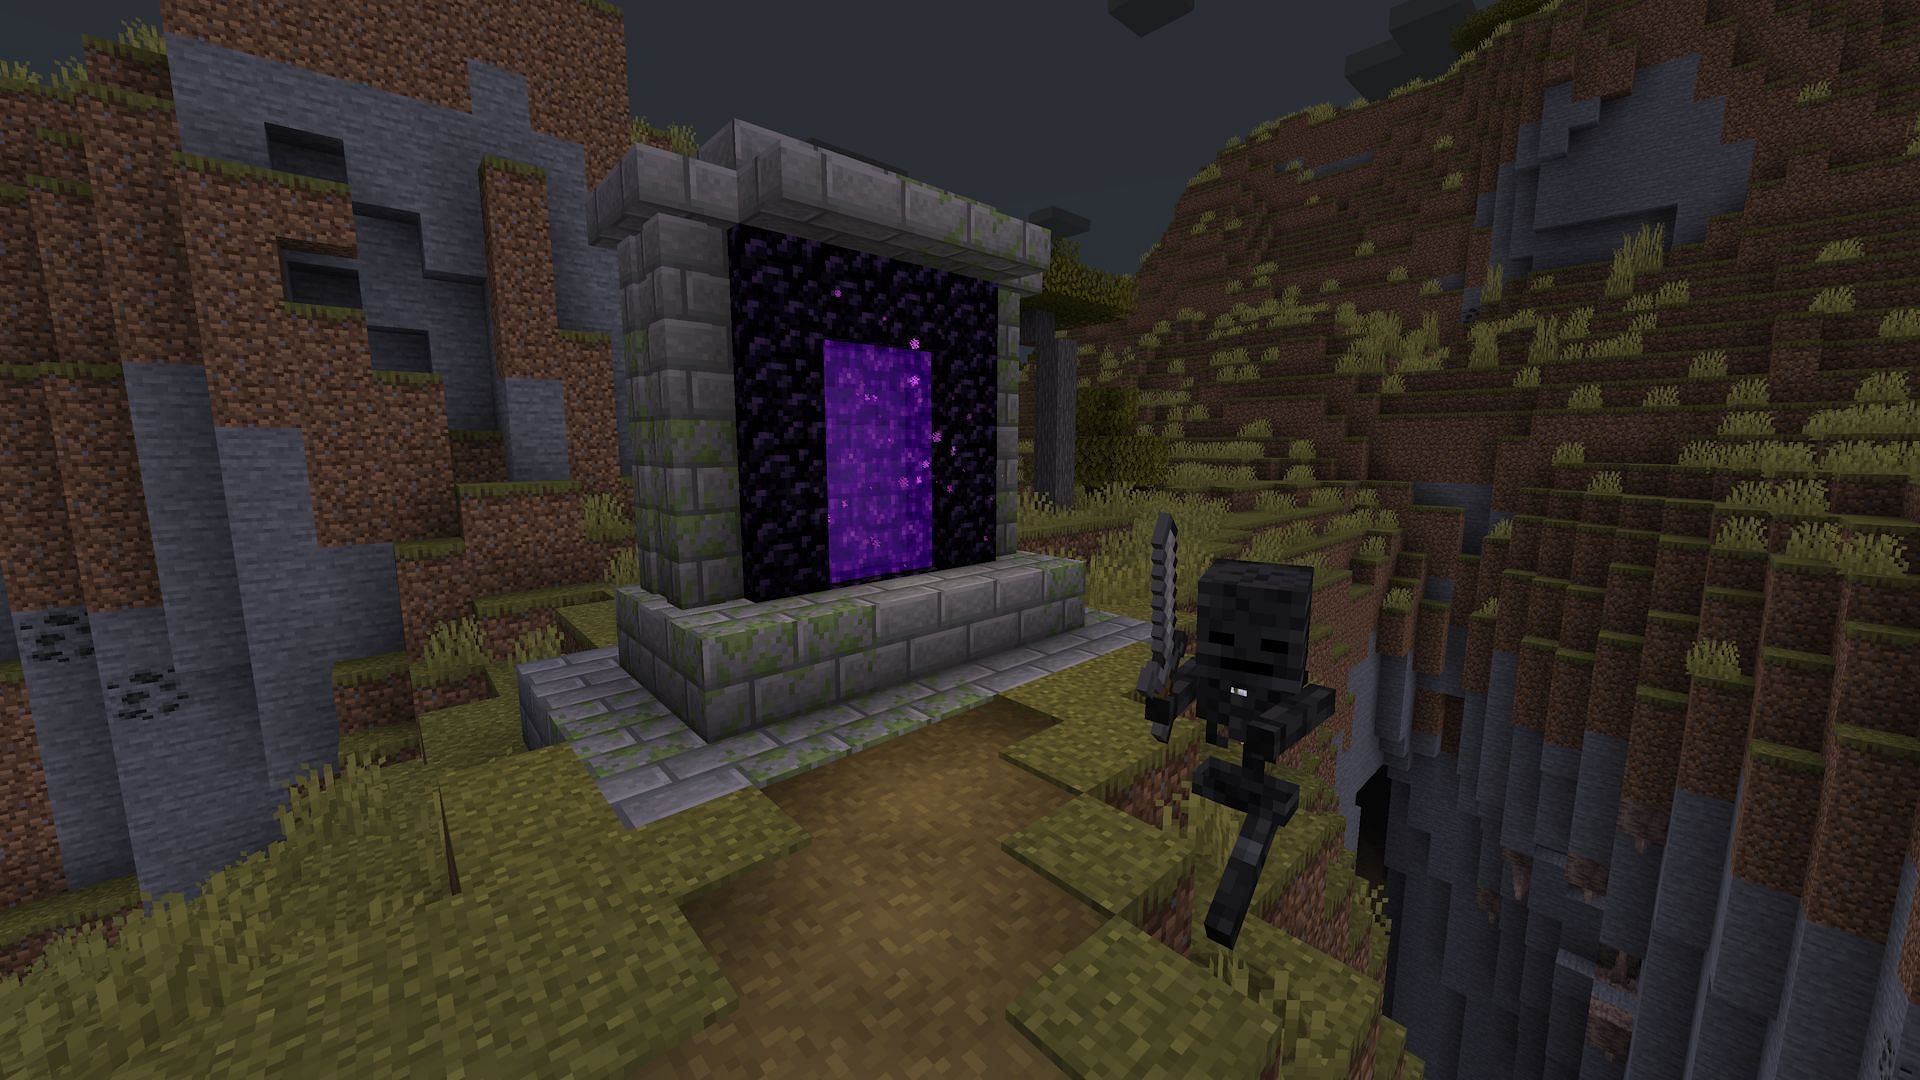 A wither skeleton popping into Minecraft&#039;s overworld is unlikely, but possible. (Image via Mojang)